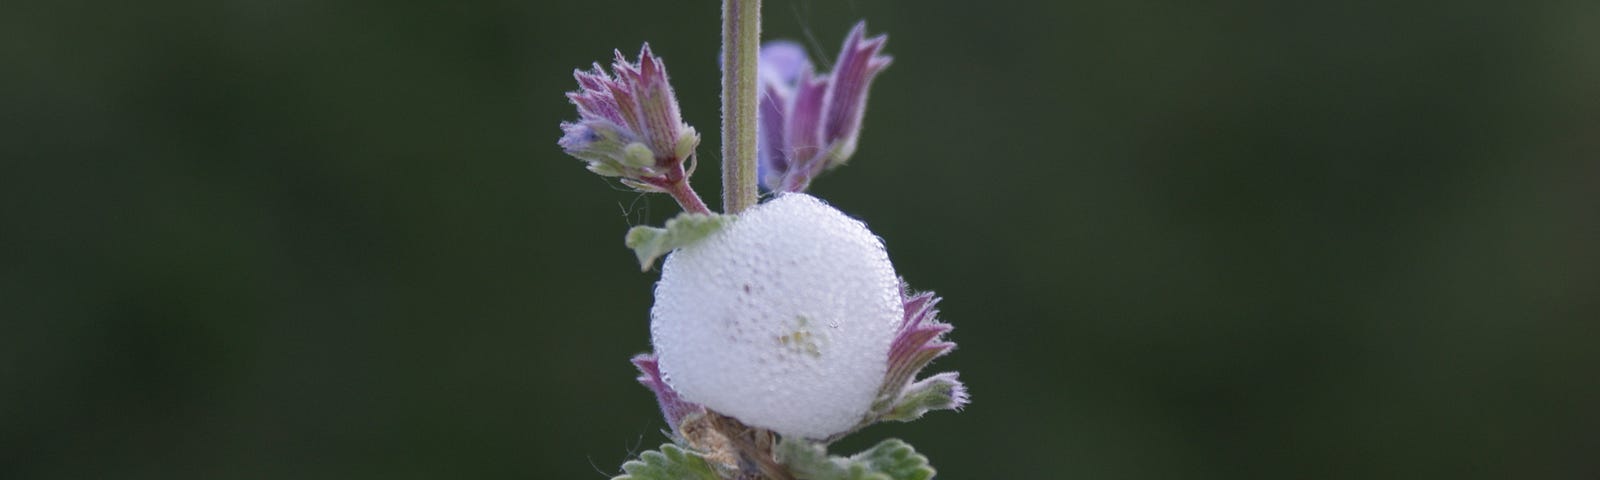 Stem of a mint plant with purple flowers and a cloud of bug spittle along the stem. Baby bugs are hidden in the spittle.